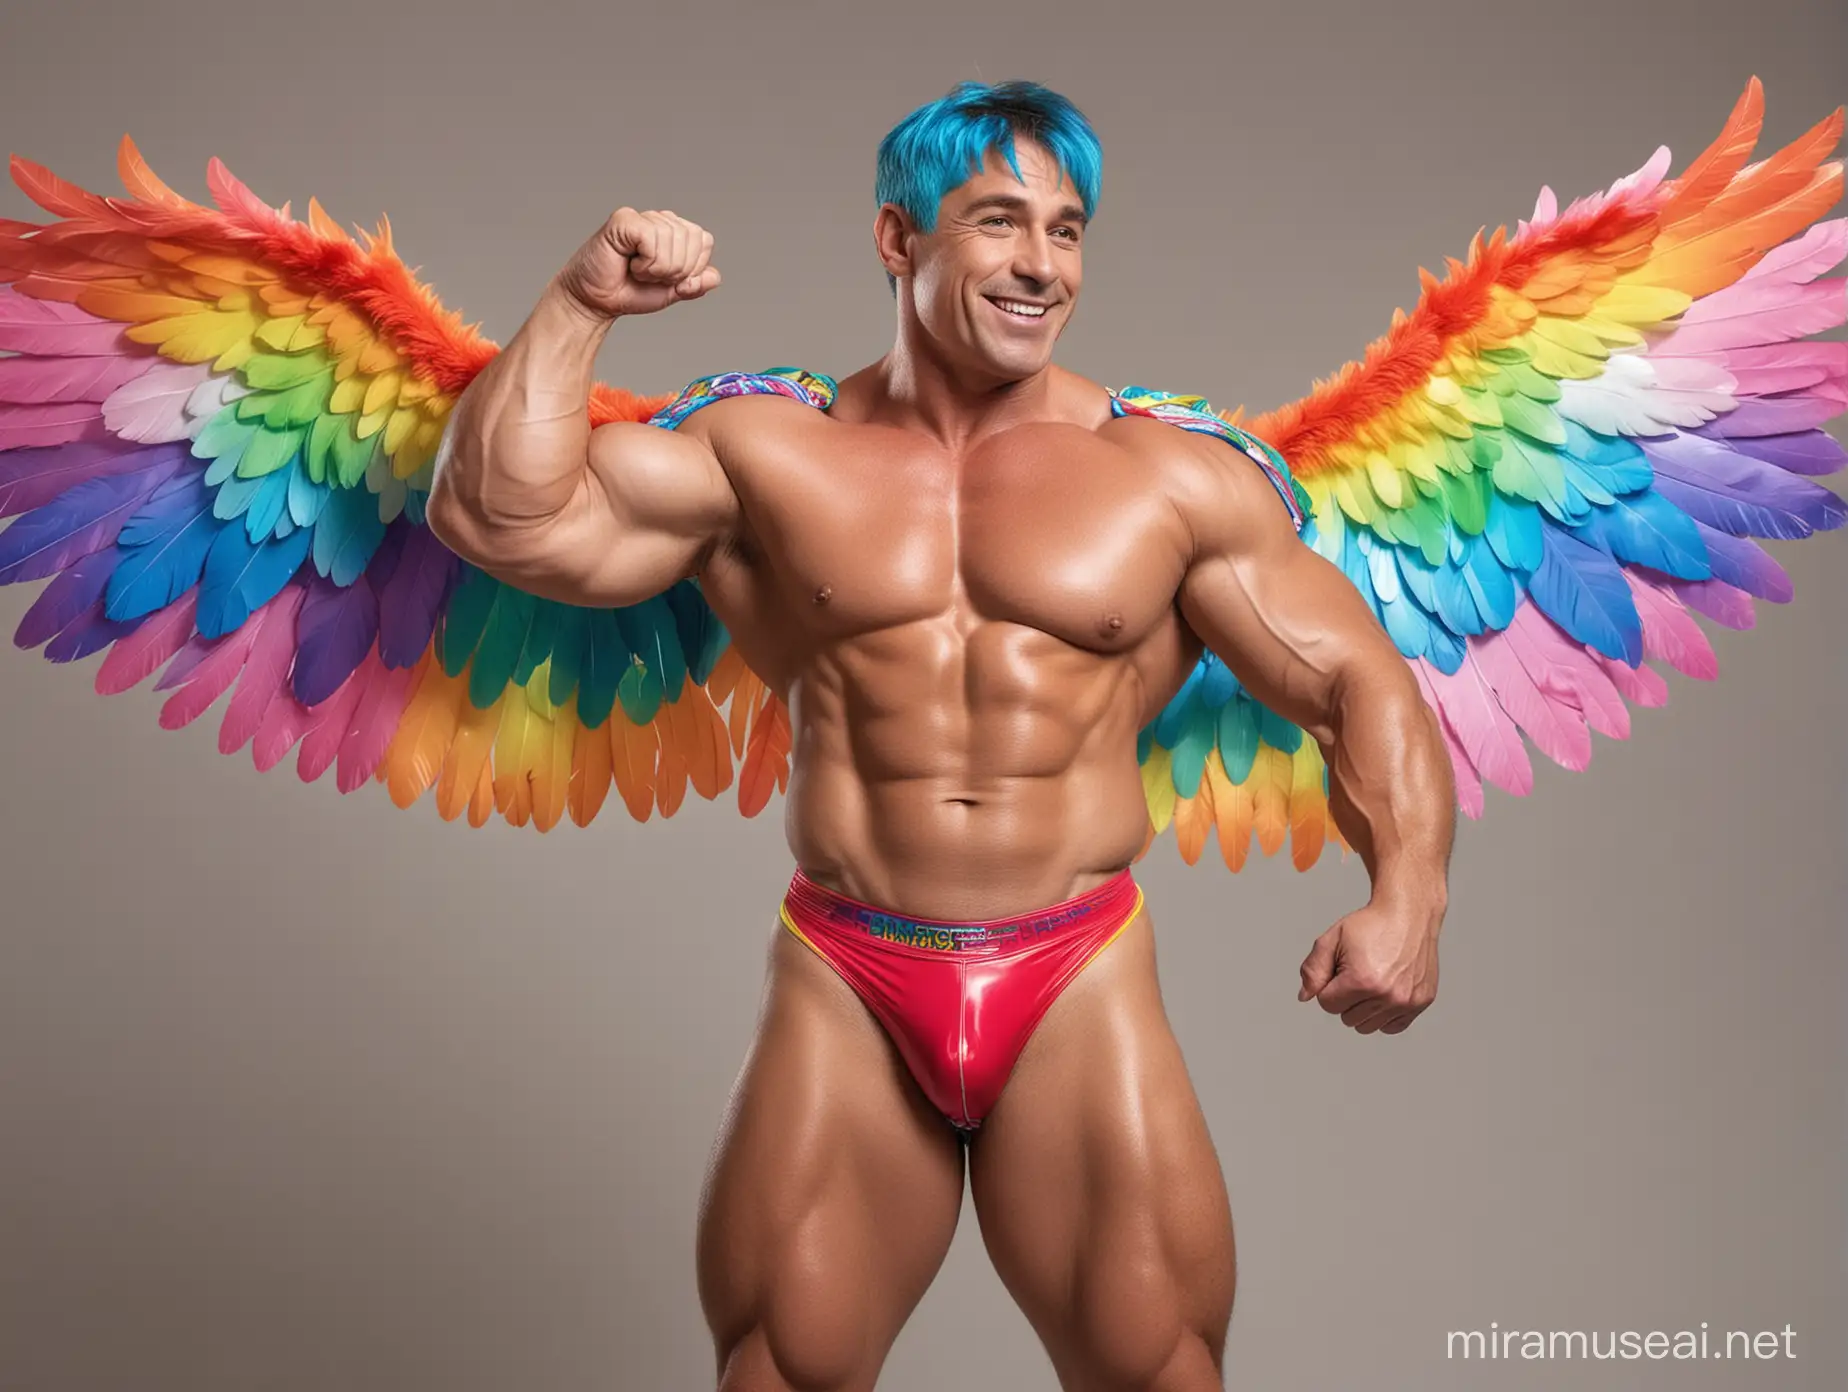 Topless 40s Ultra Beefy IFBB Bodybuilder Man wearing Multi-Highlighter Bright Rainbow Coloured See Through Eagle Wings shoulder Jacket short shorts and Flexing Big Strong Arm with Doraemon